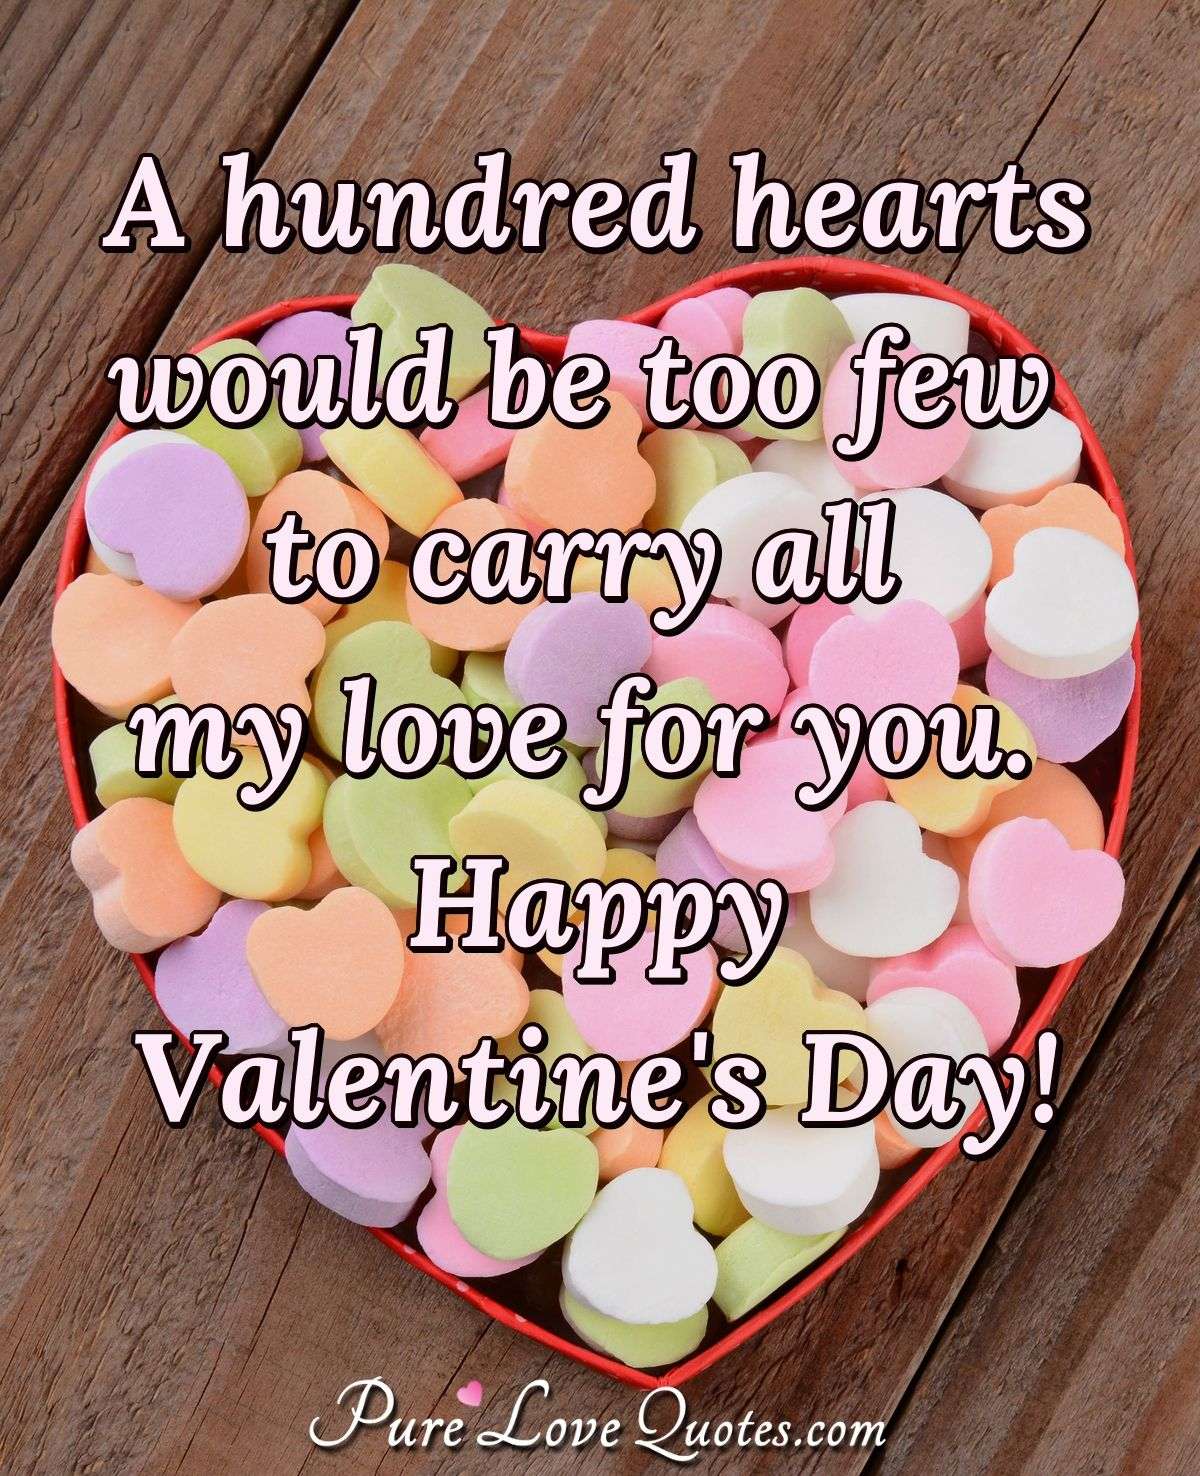 A hundred hearts would be too few to carry all my love for you. Happy Valentine's Day! - Anonymous